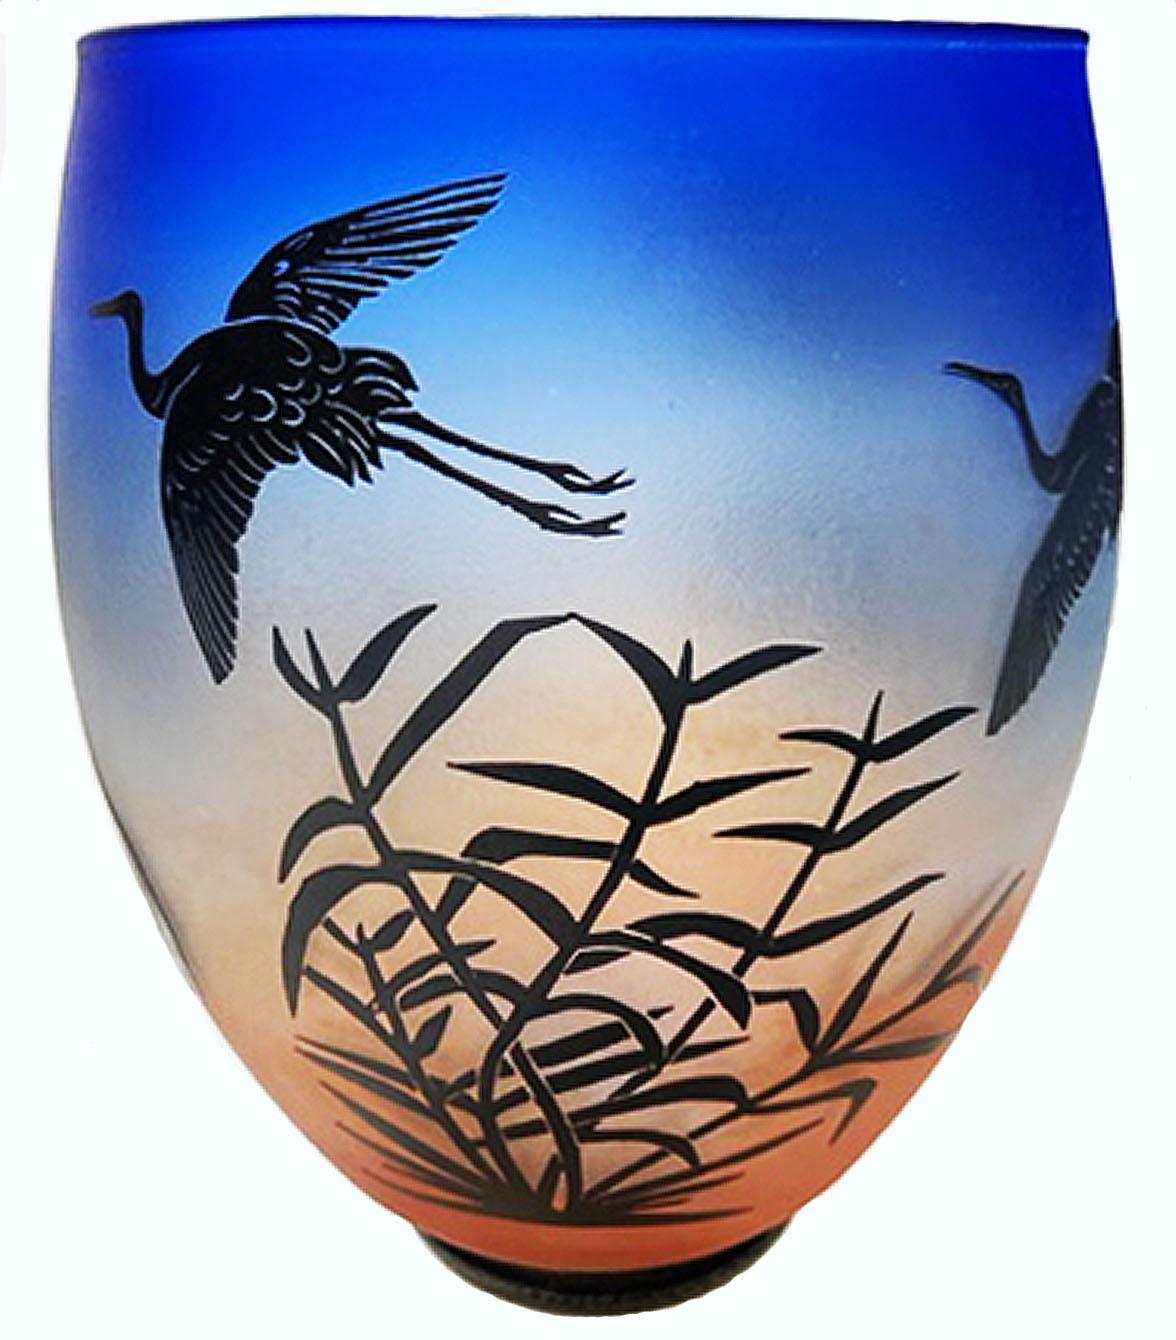 This piece is overlay blown and cameo etched glass. It is one of three remaining piece in a completed limited series. The series was originally designed and sold through Artful Home catalog in 2010 and continued from there to artfair market. The